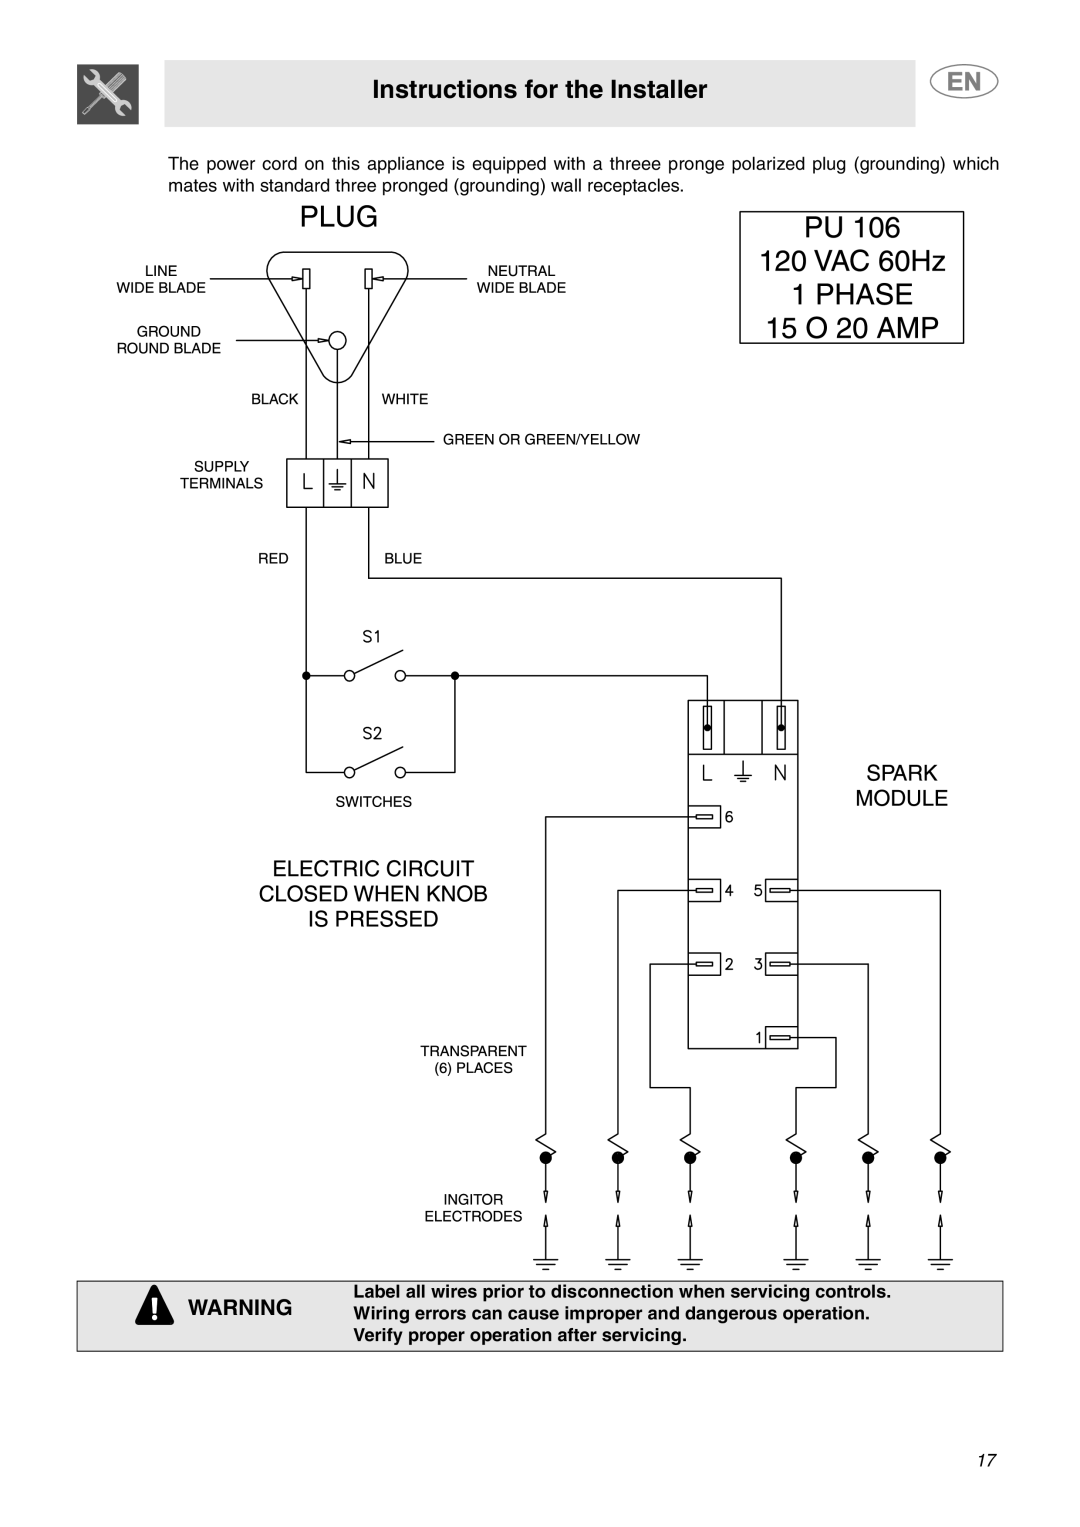 Smeg PU75, PU64, PU106 Gas Instructions for the Installer, Label all wires prior to disconnection when servicing controls 